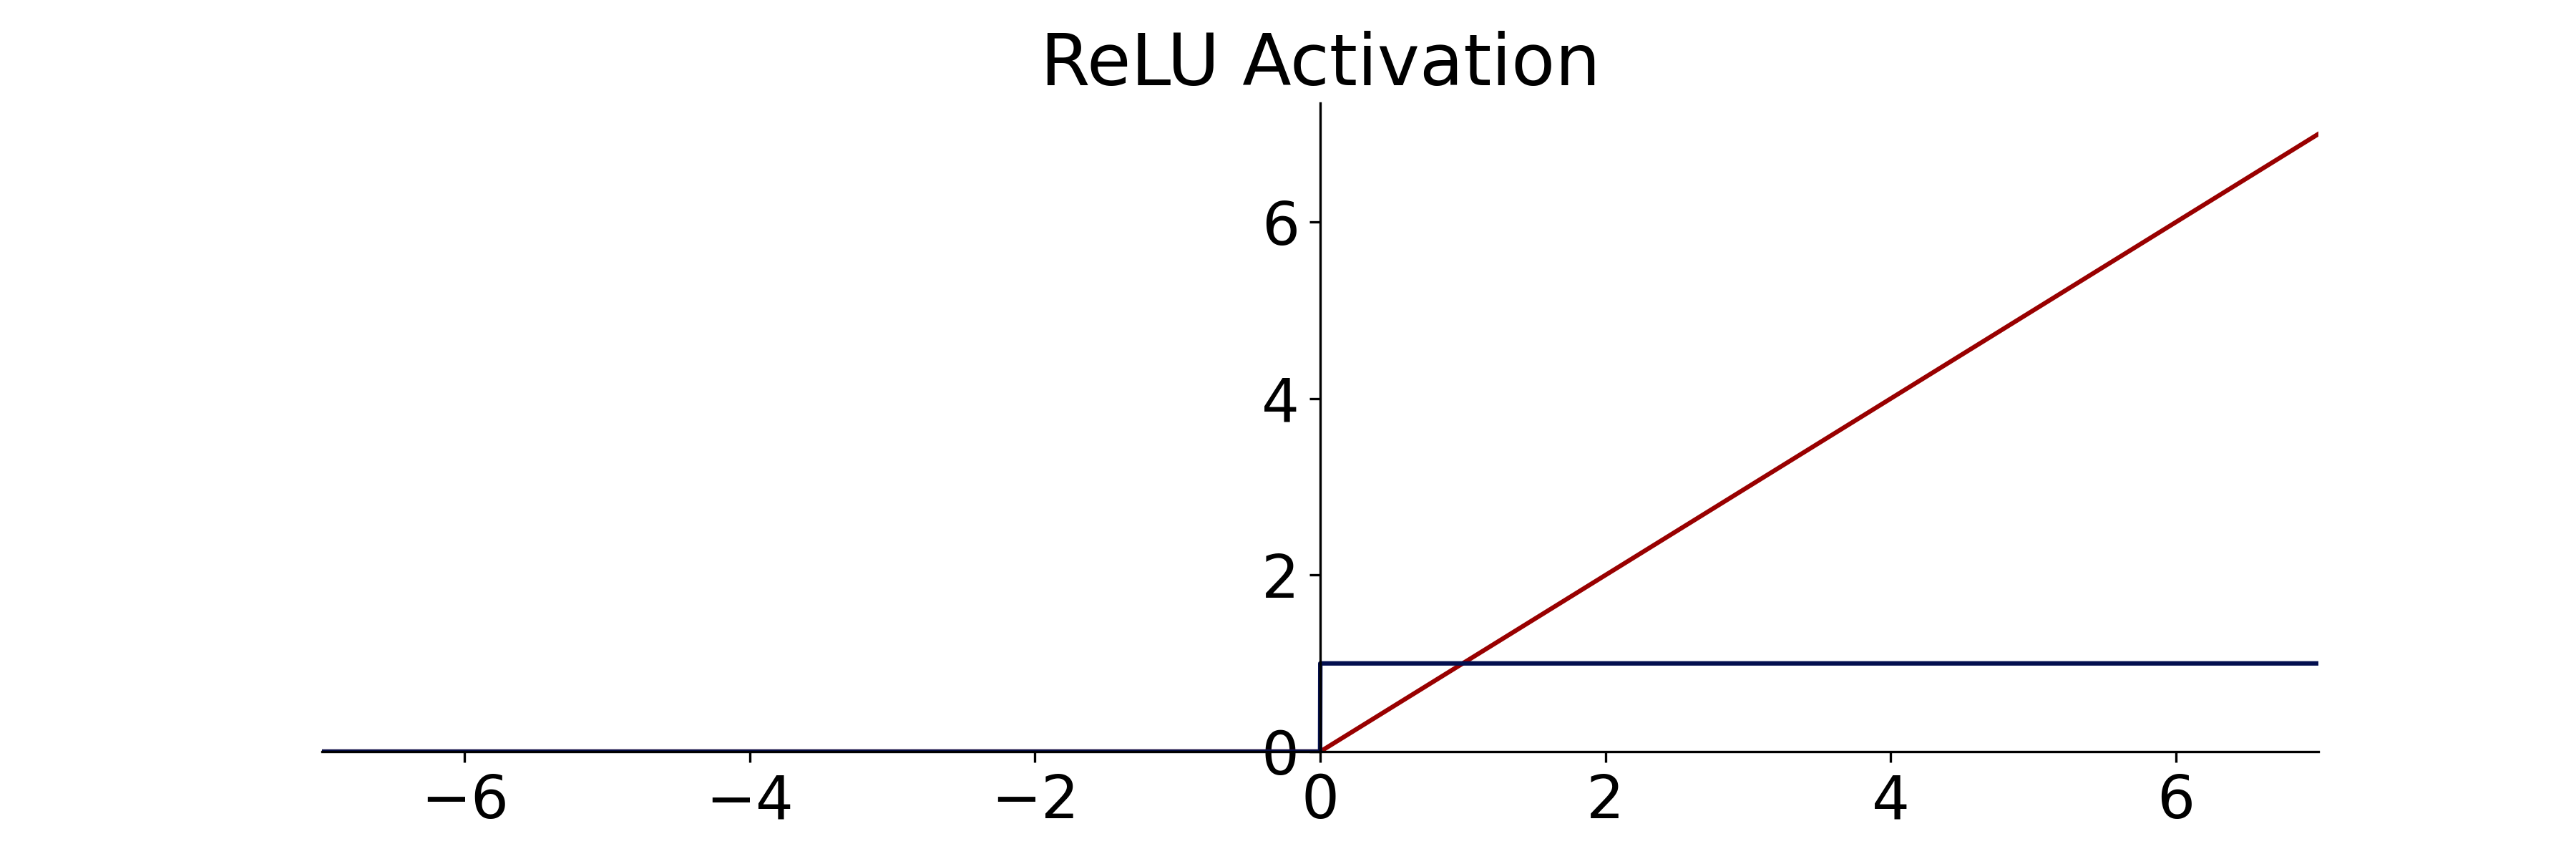 ReLU activation (red) and derivative (blue) for efficient gradient computation.